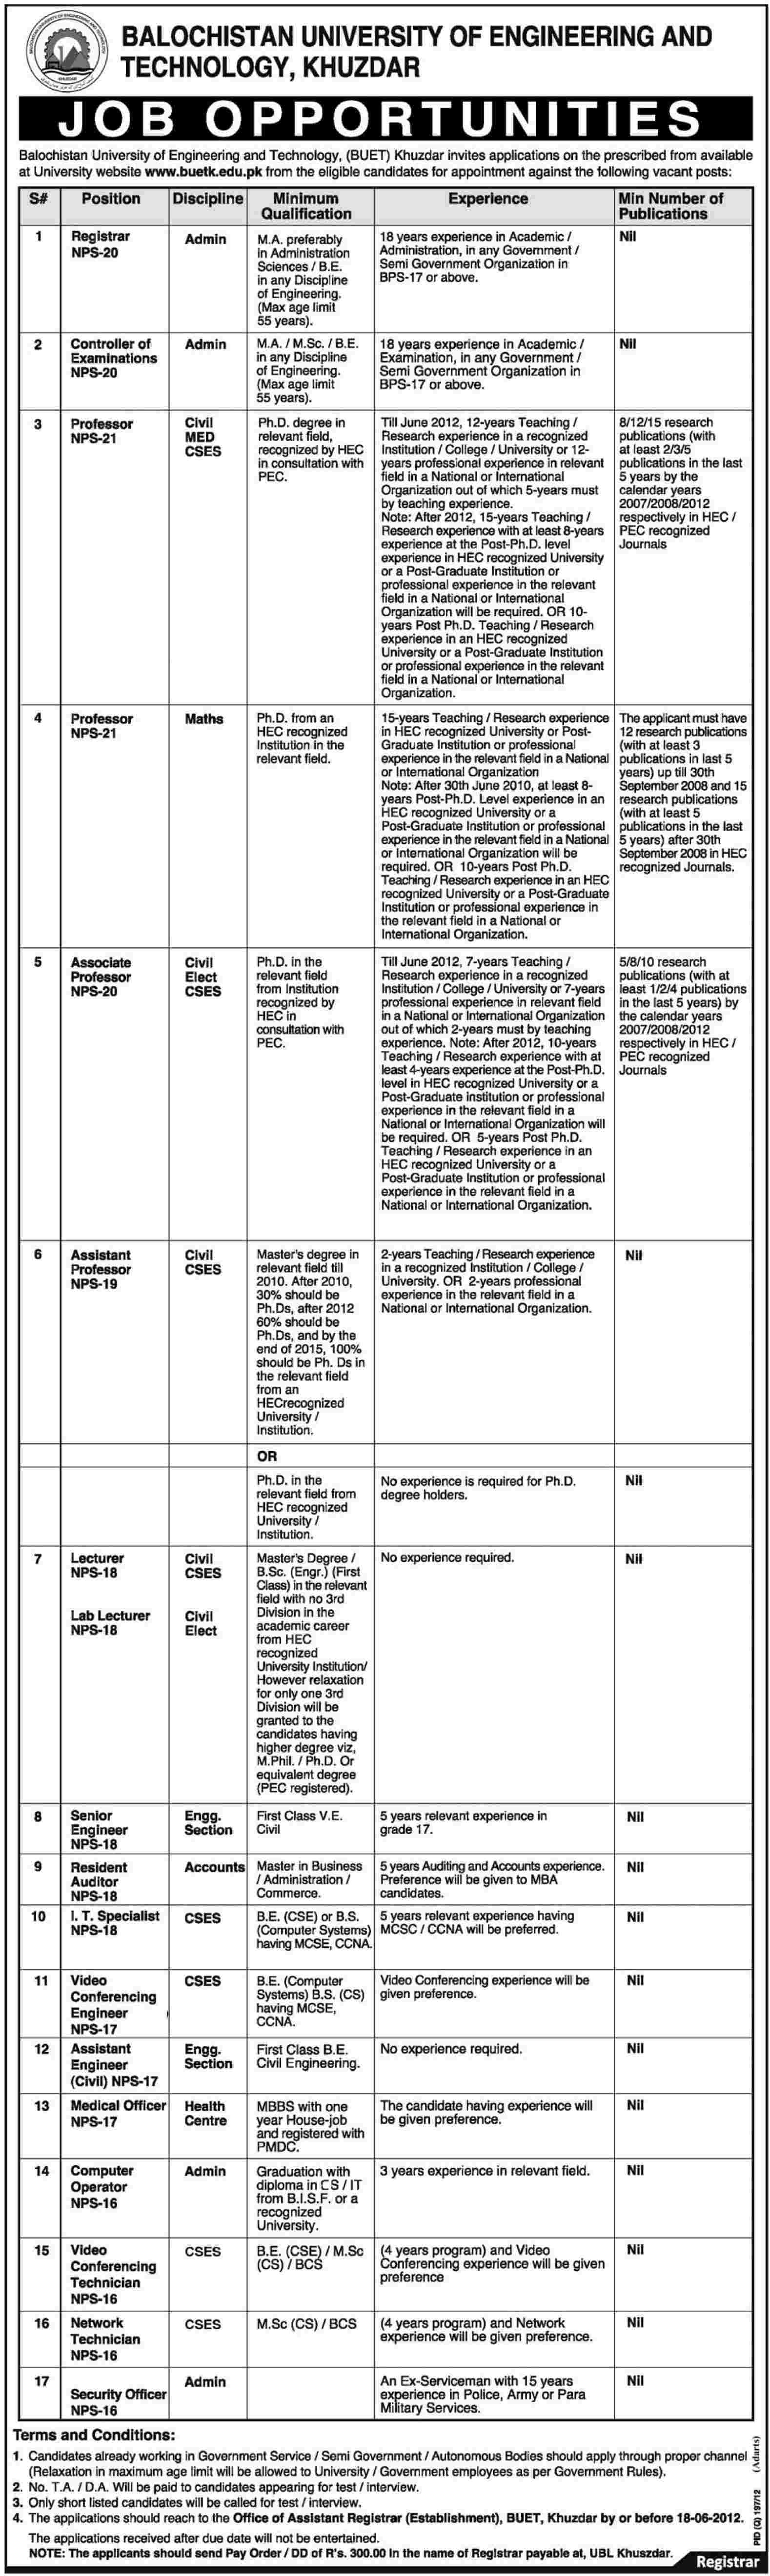 Academic and Non-Academic Staff Required at Balochistan University of Engineering and Technology